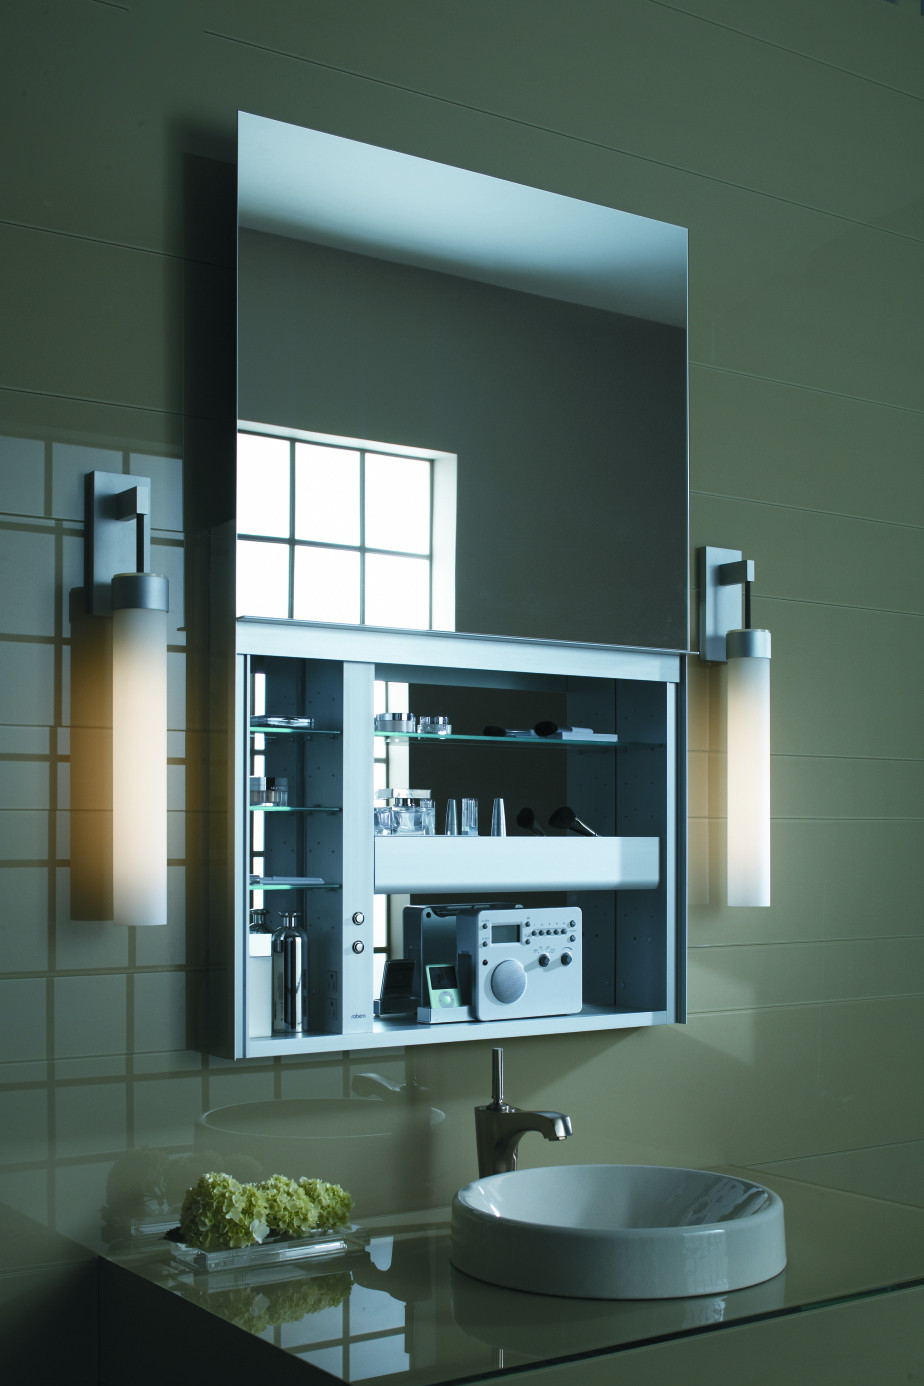 Bathroom Medicine Cabinets With Lights
 Interior Bathroom Furniture Kitchen And Bath Awesome